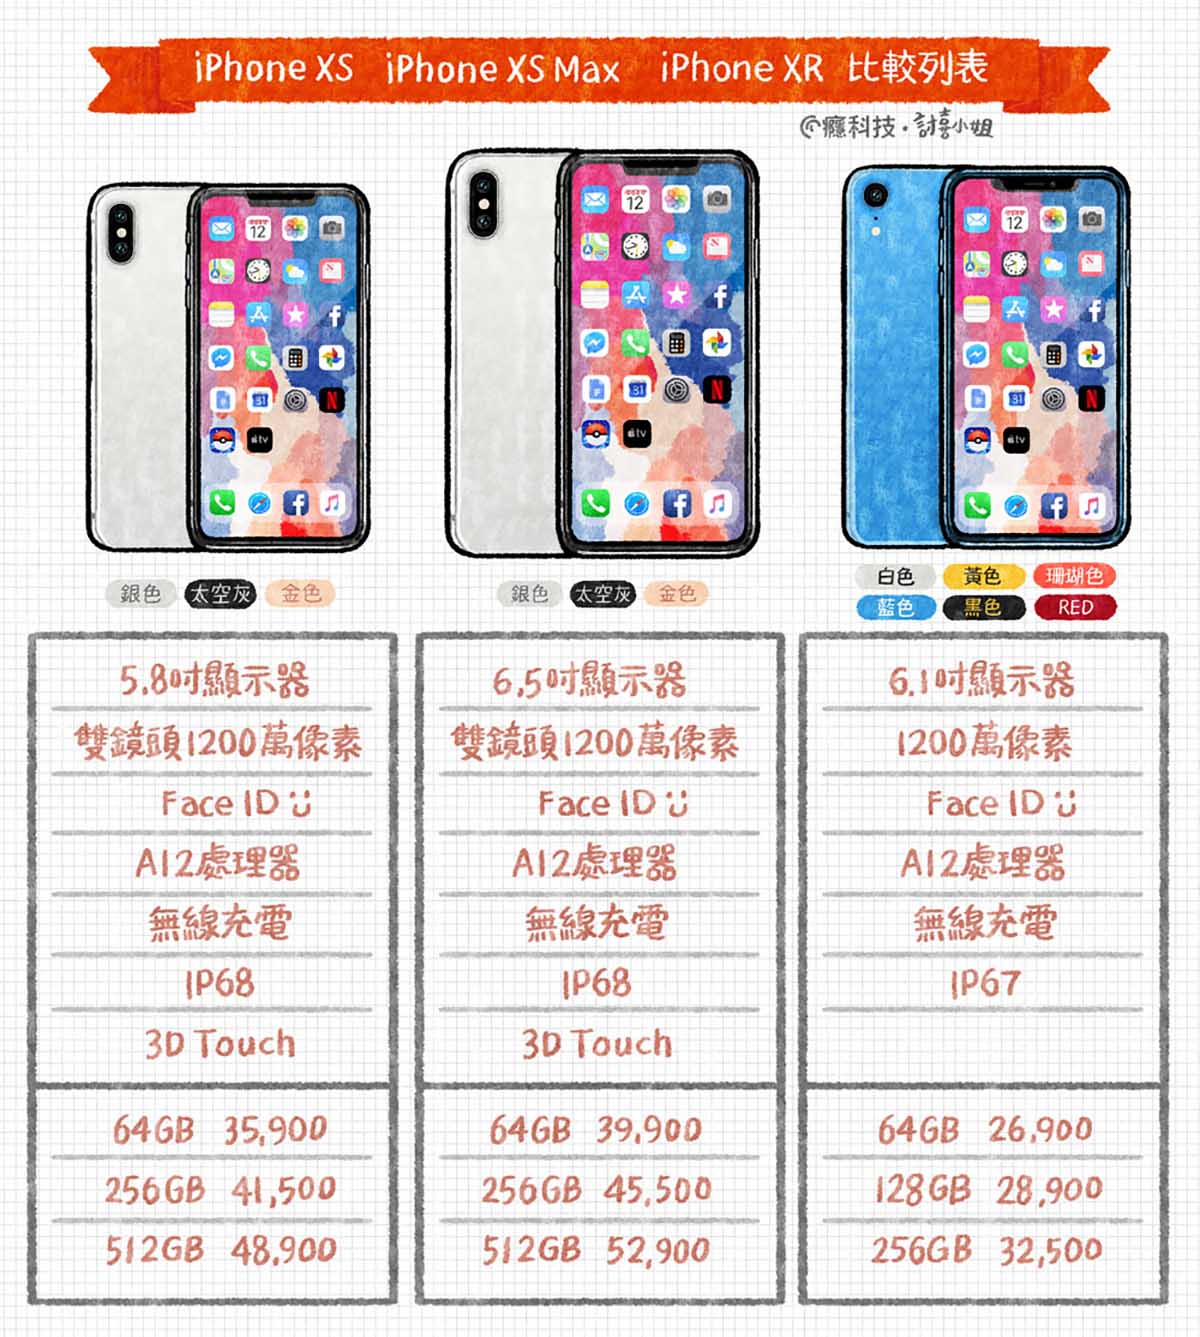 Feature phone, Text messaging, Line, Font, Mobile Phone Accessories, iPhone, Mobile Phones, refurbished Apple iPhone 5 T-Mobile Slate 64GB (ME490LL/A) (A1428), Gray, refurbished Apple iPhone 5 T-Mobile White 16GB (MD294LL/A) (A1428), refurbished Apple iPhone 5 T-Mobile White 64GB (MD643LL/A) (A1428), feature phone, technology, text, telephony, mobile phone accessories, line, feature phone, font, mobile phone, mobile phone case, product